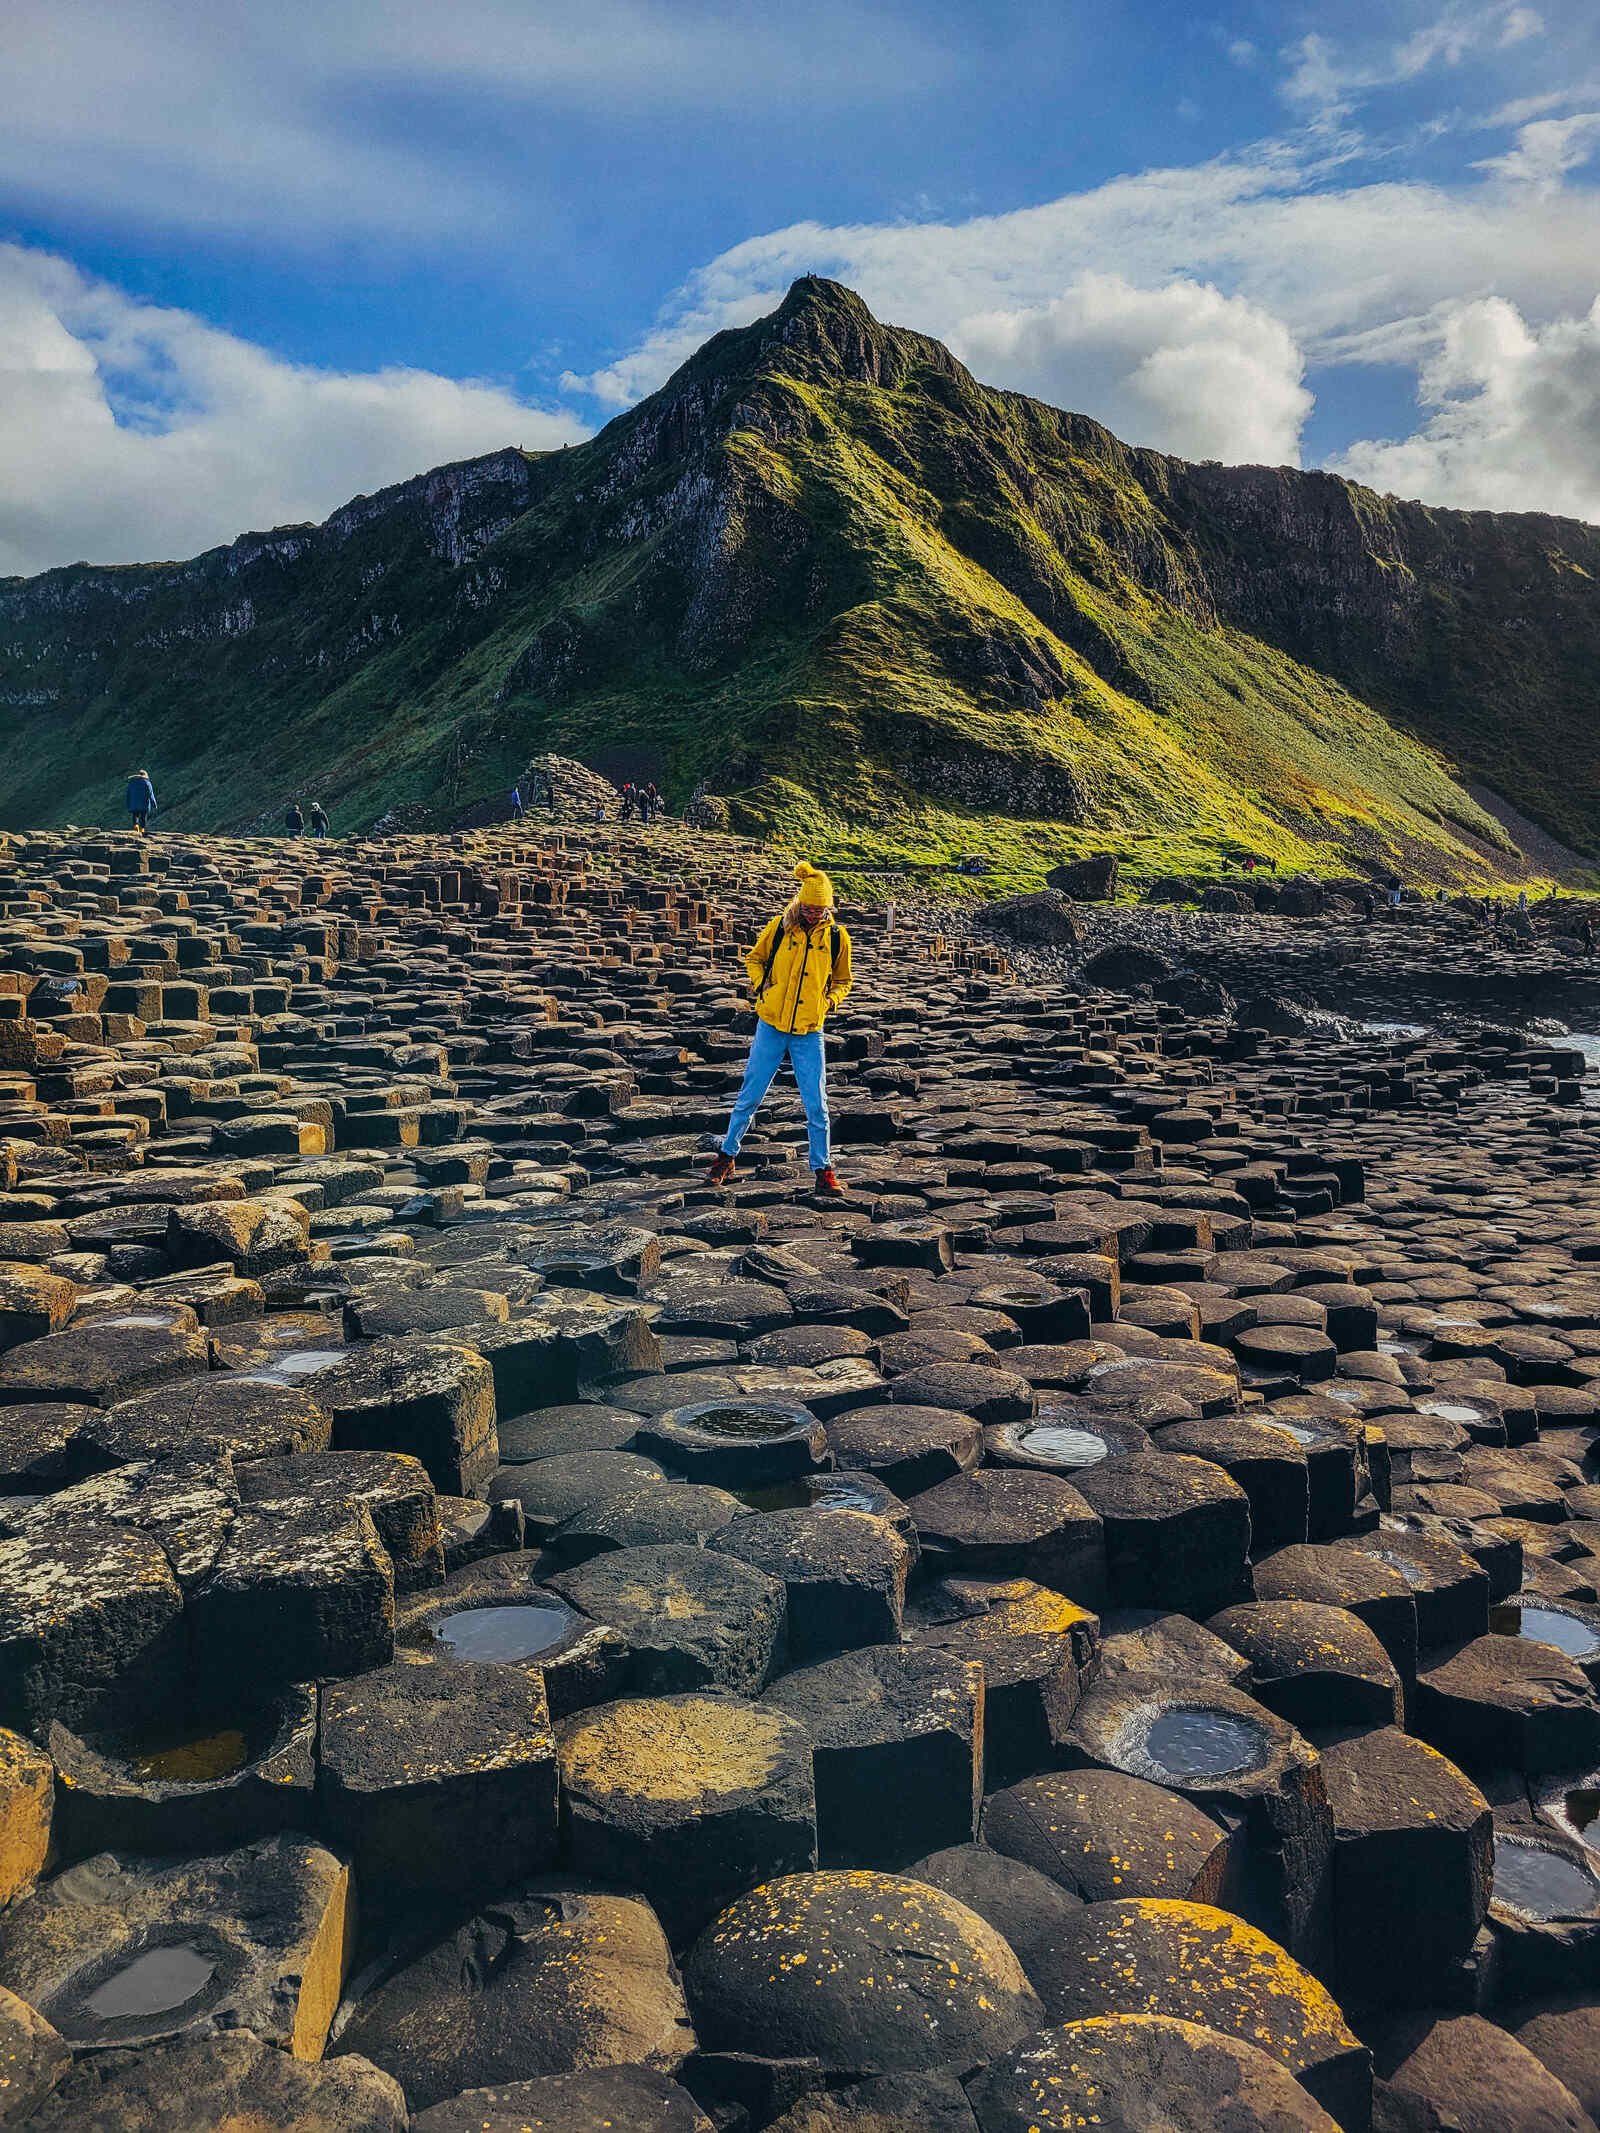 Hundreds of hexagonal rocks on the ground with a girl jumping between them and a green rocky cliff face in the background at the Giant's Causeway in Northern Ireland